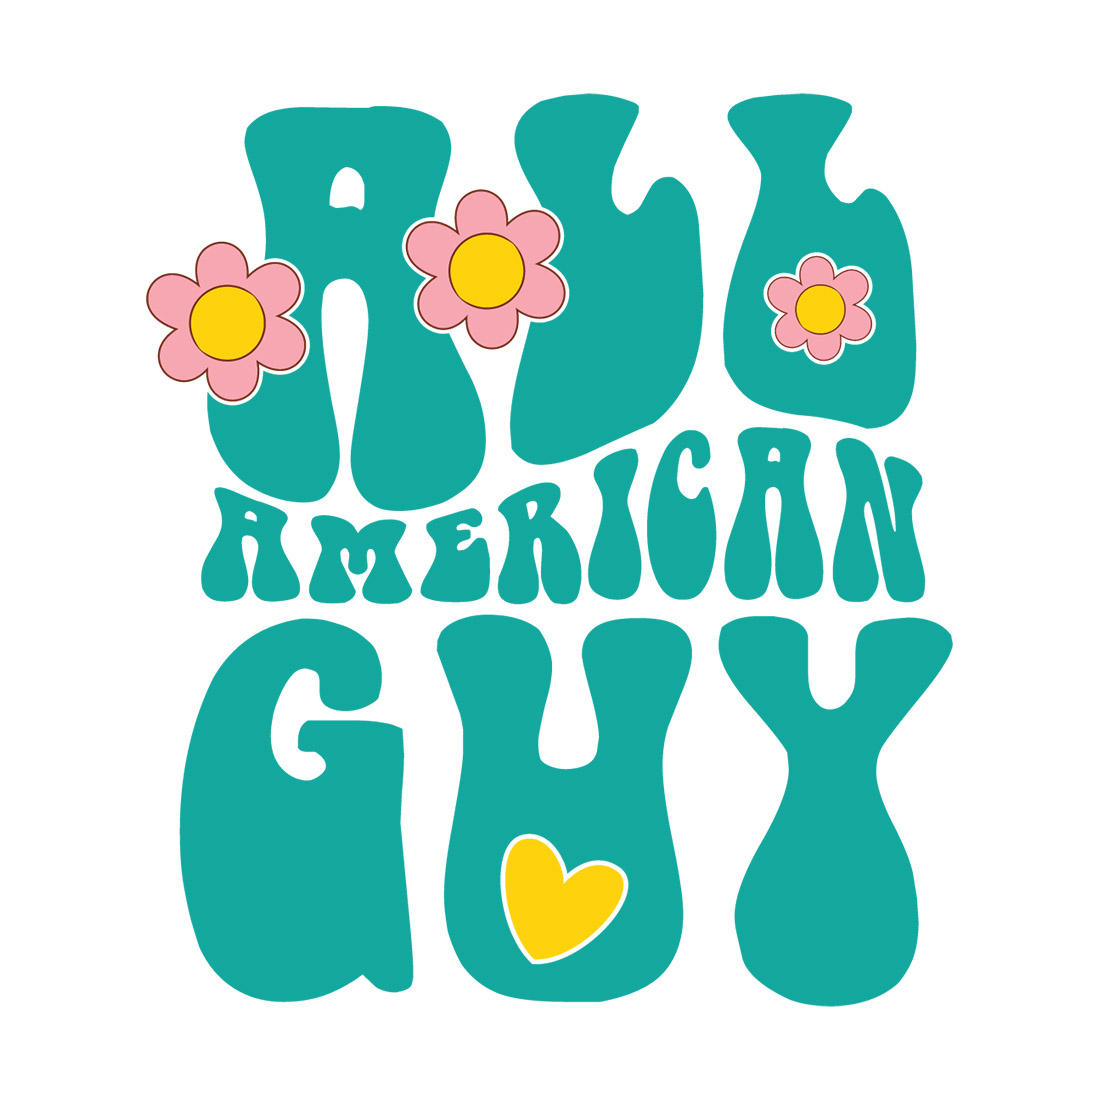 All American Guy cover image.